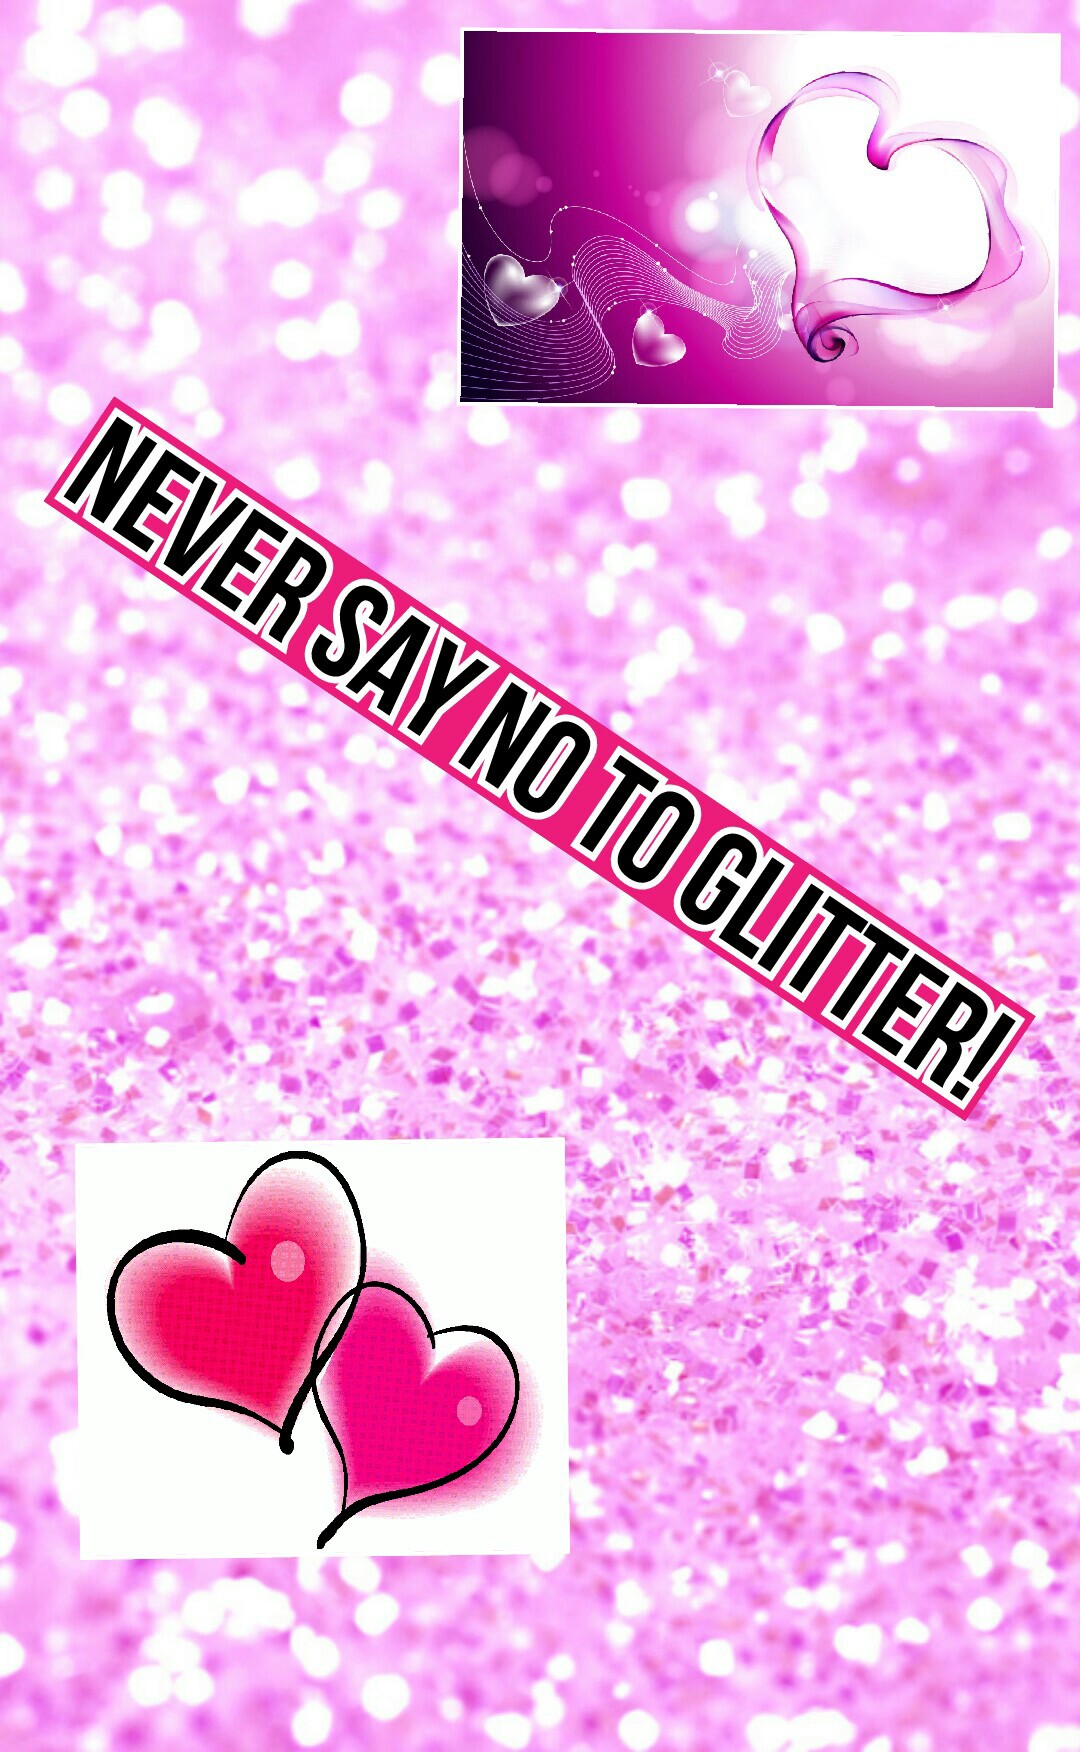 Never say no to glitter!